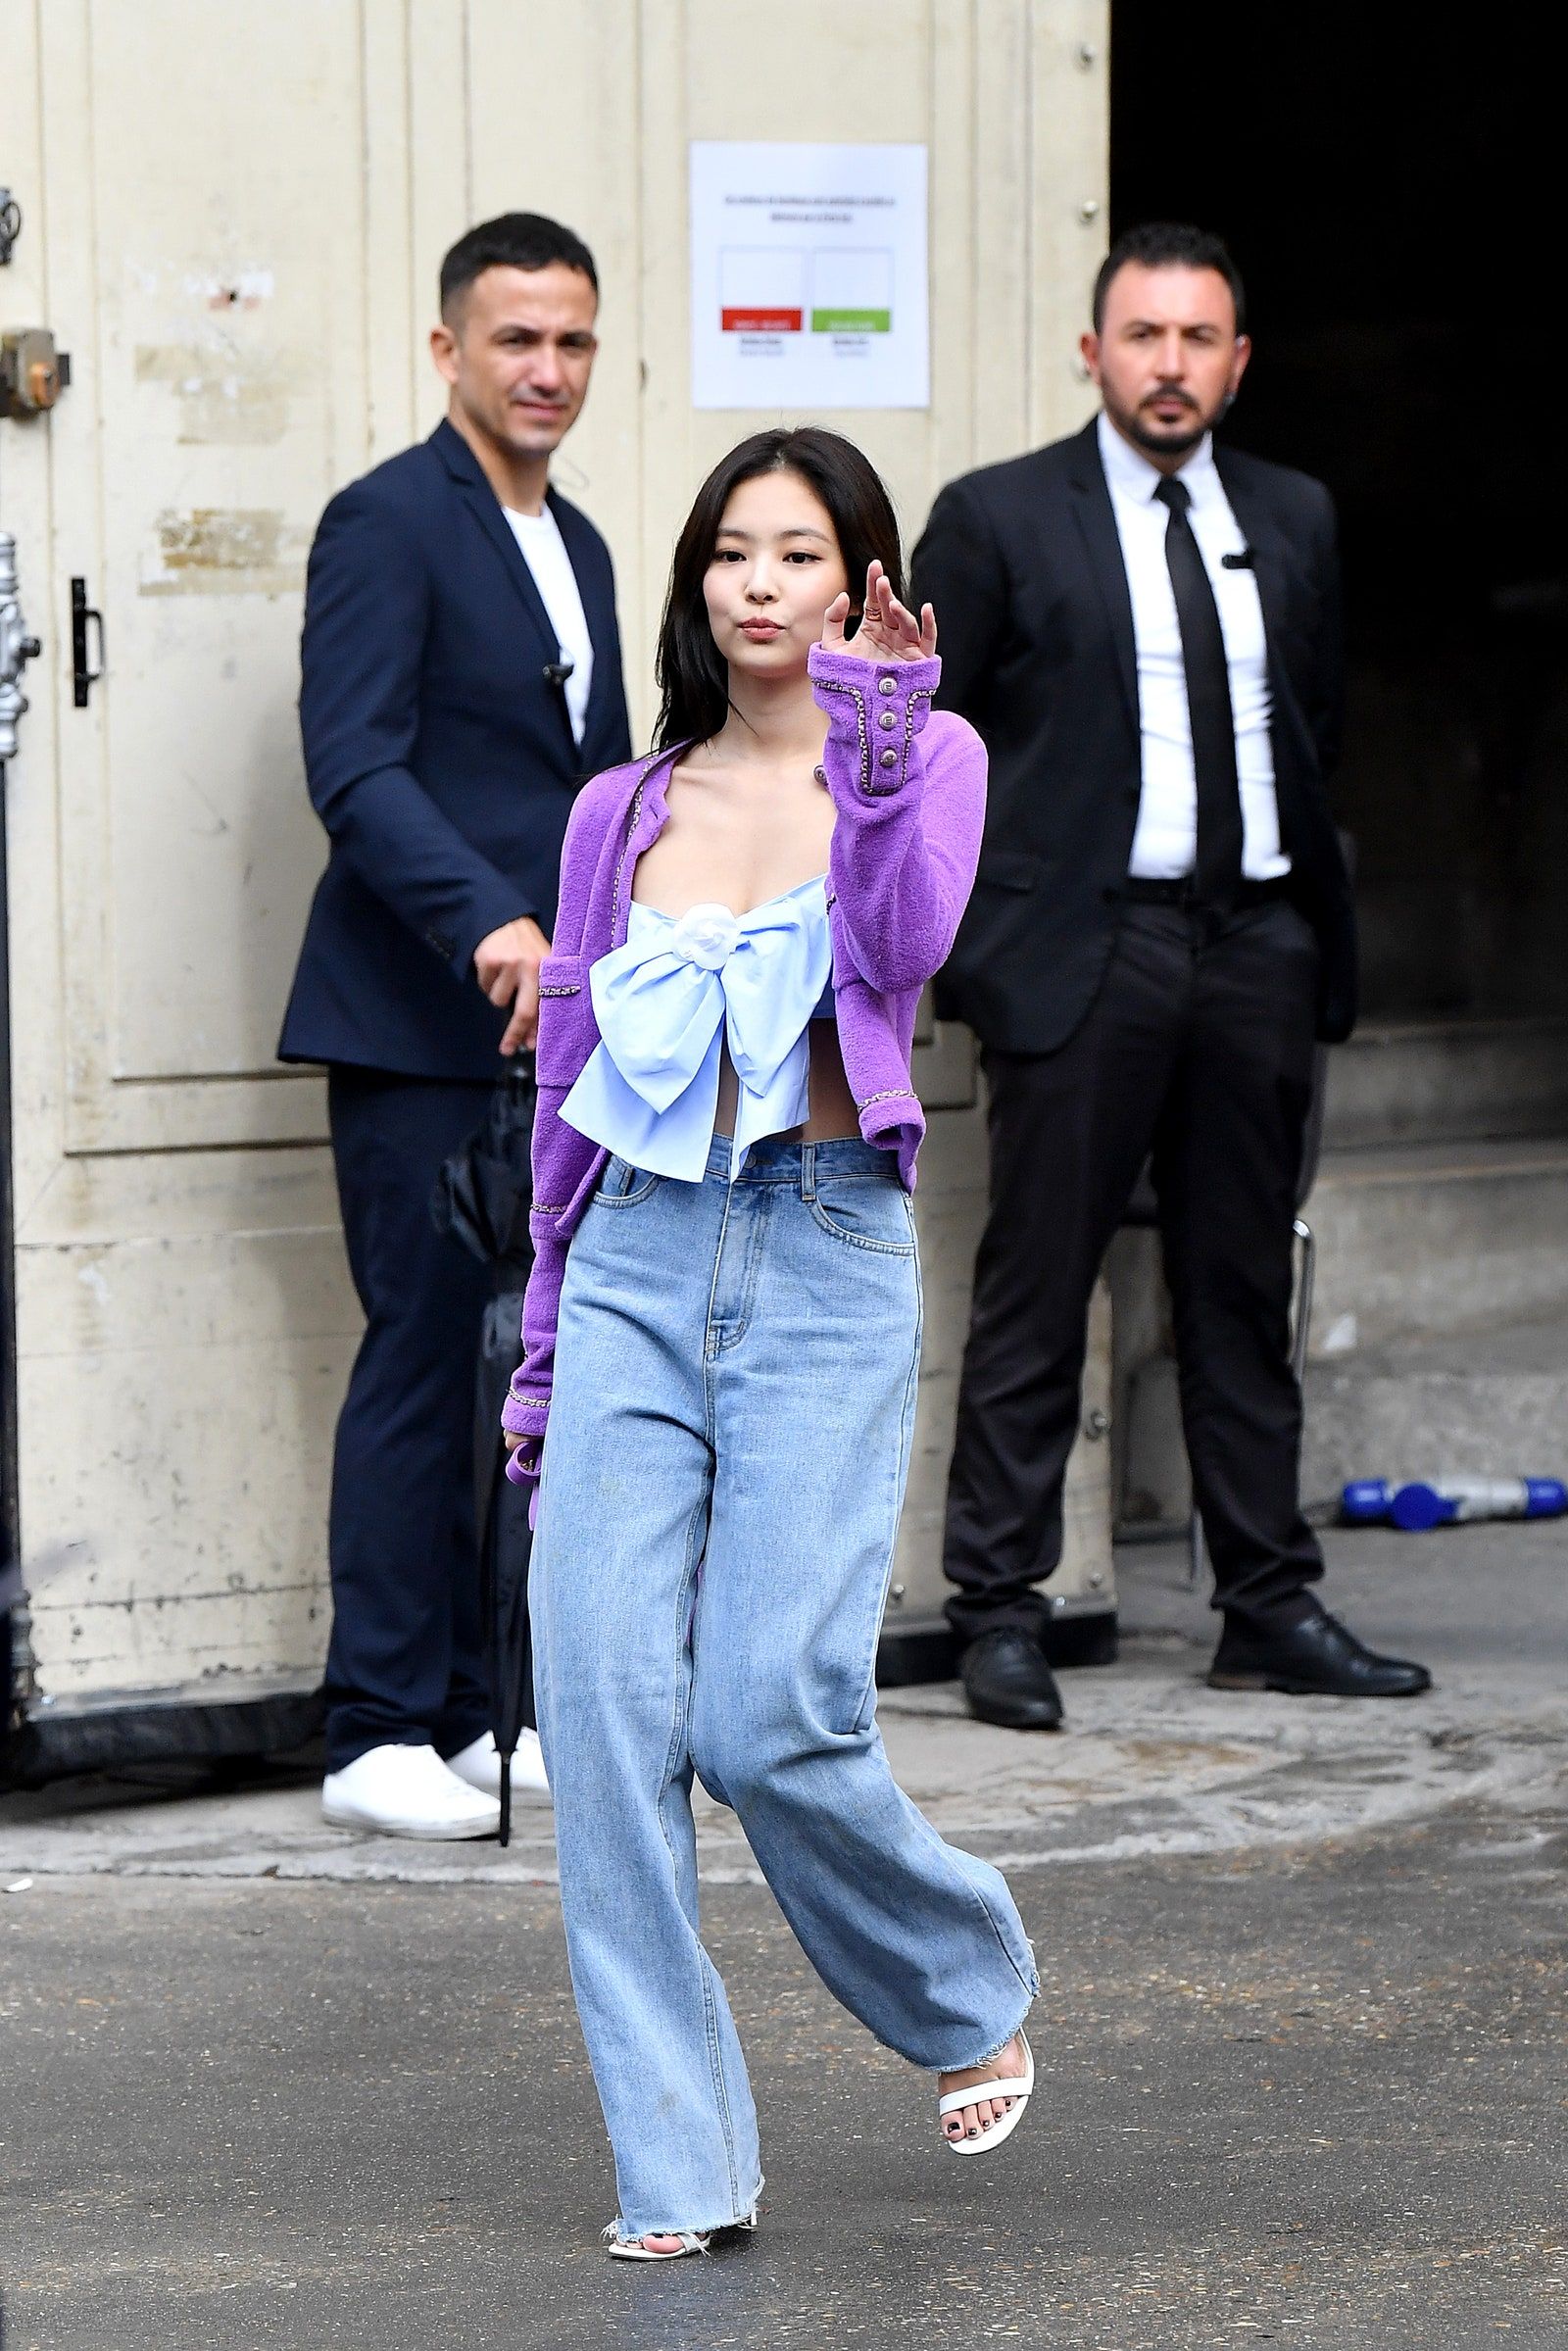 16 Outfits That Prove Blackpinks Jennie Is Obsessed With Chanel  British  Vogue